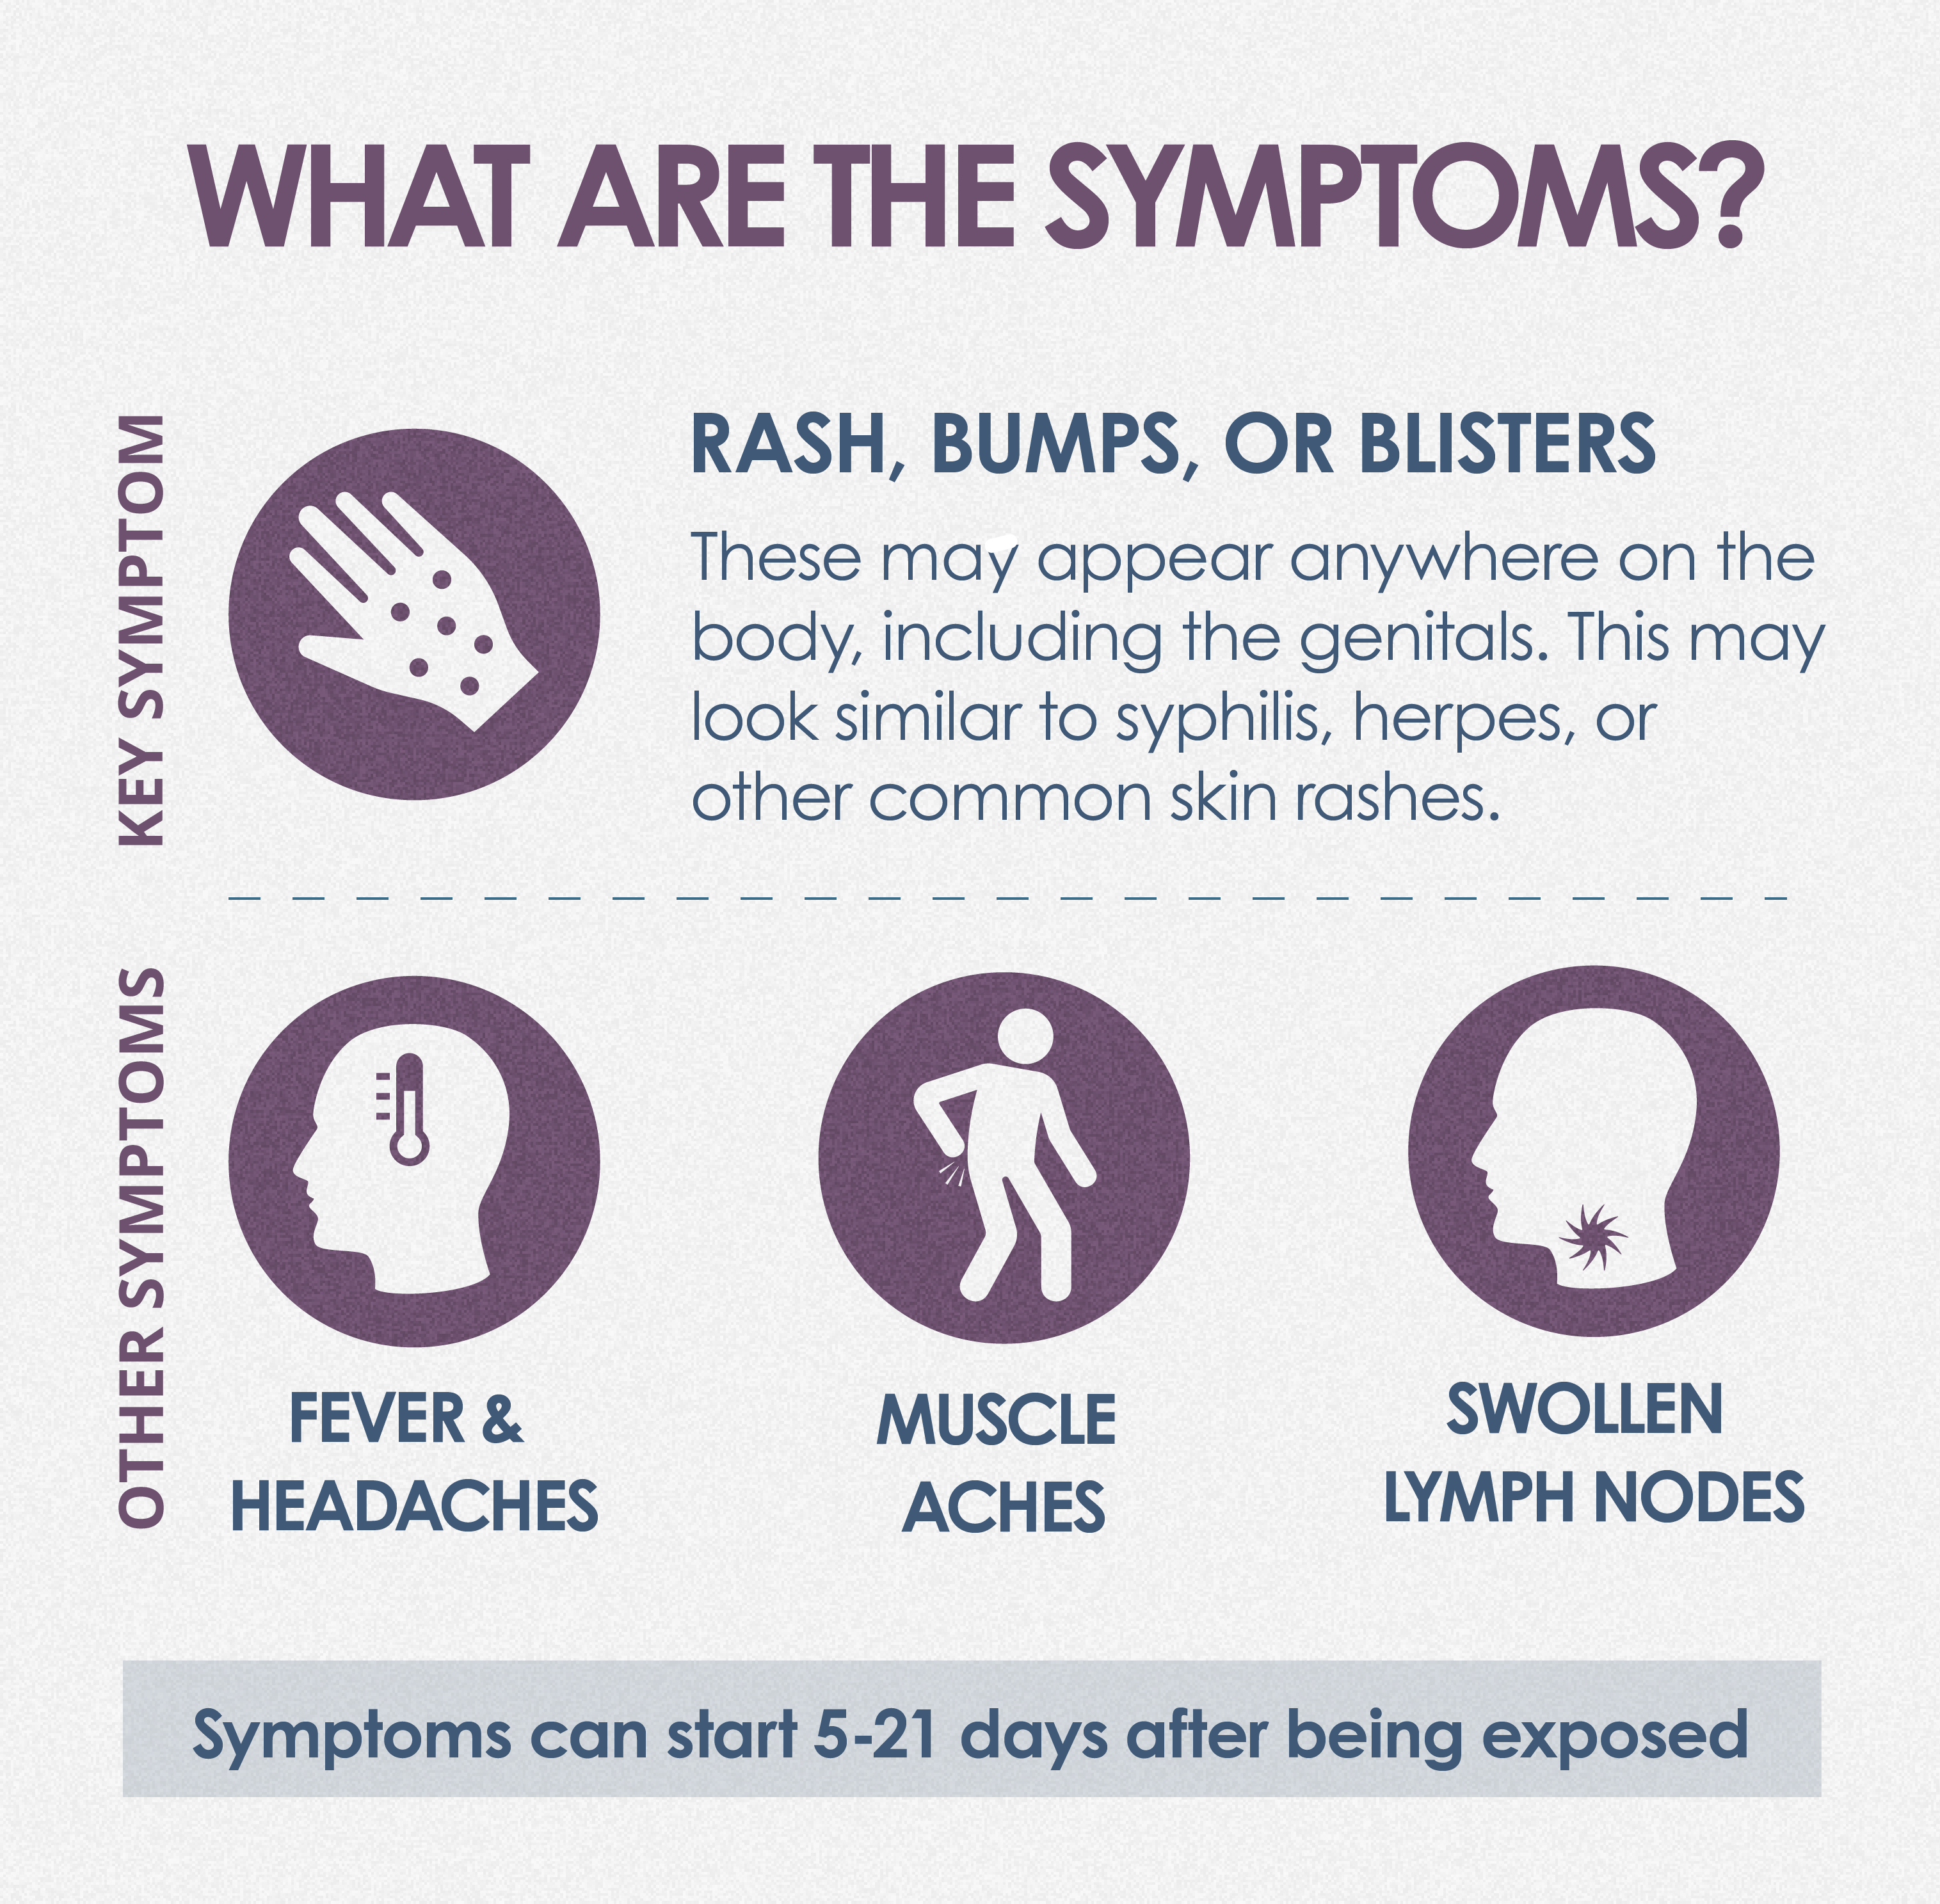 What are the symptoms? Infographic showing rash, bumps, blisters, fever, headache, muscle ache and swollen lymph node icons 